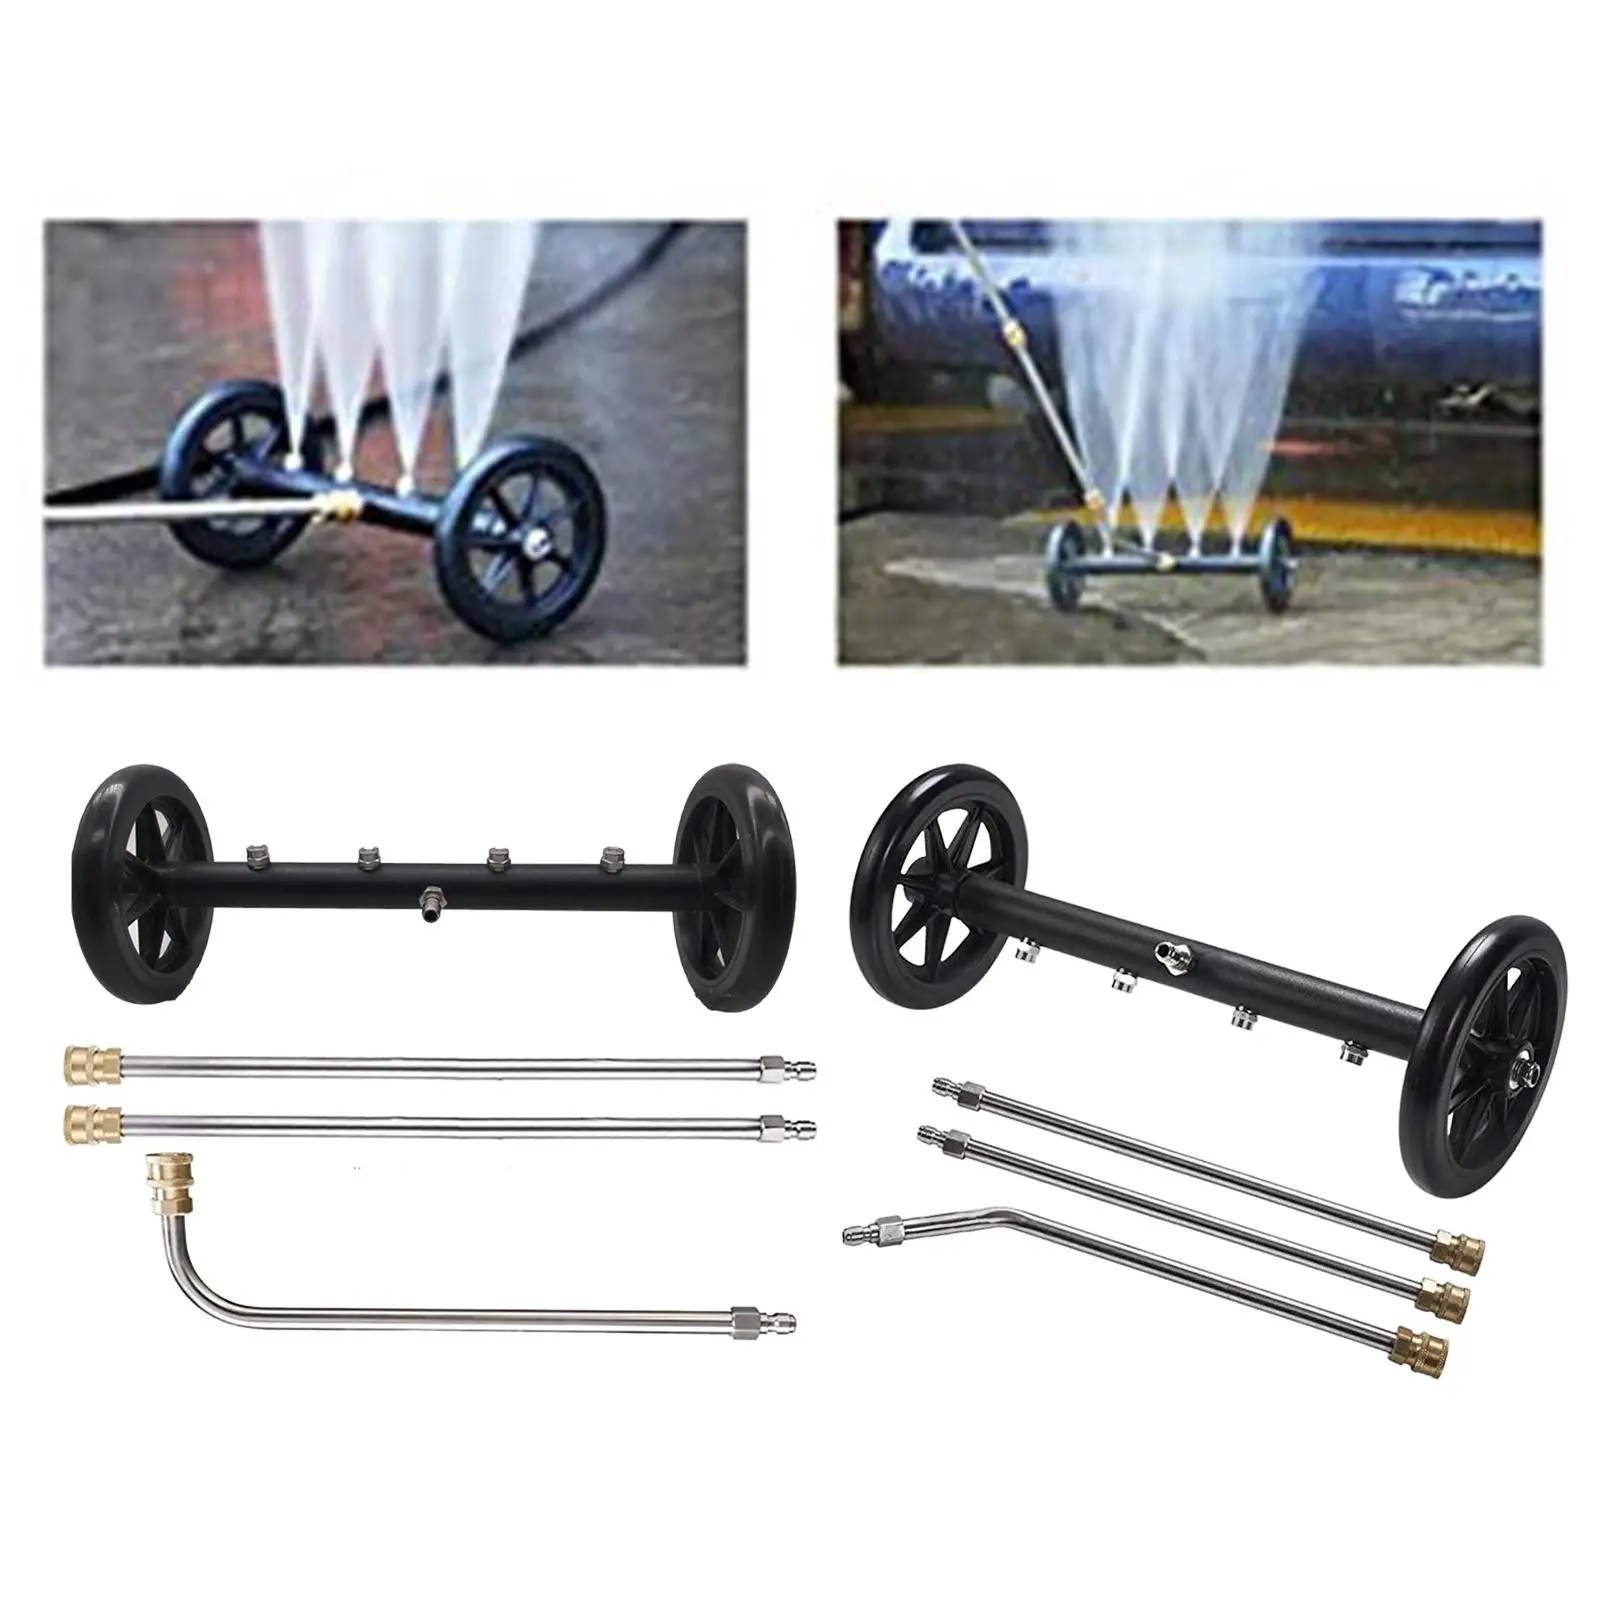 1/4 2 in 1 Power Washer Accessories Undercarriage Cleaning Kit with Extension Wand Vehicle Accessories Underbody Car Water Broom